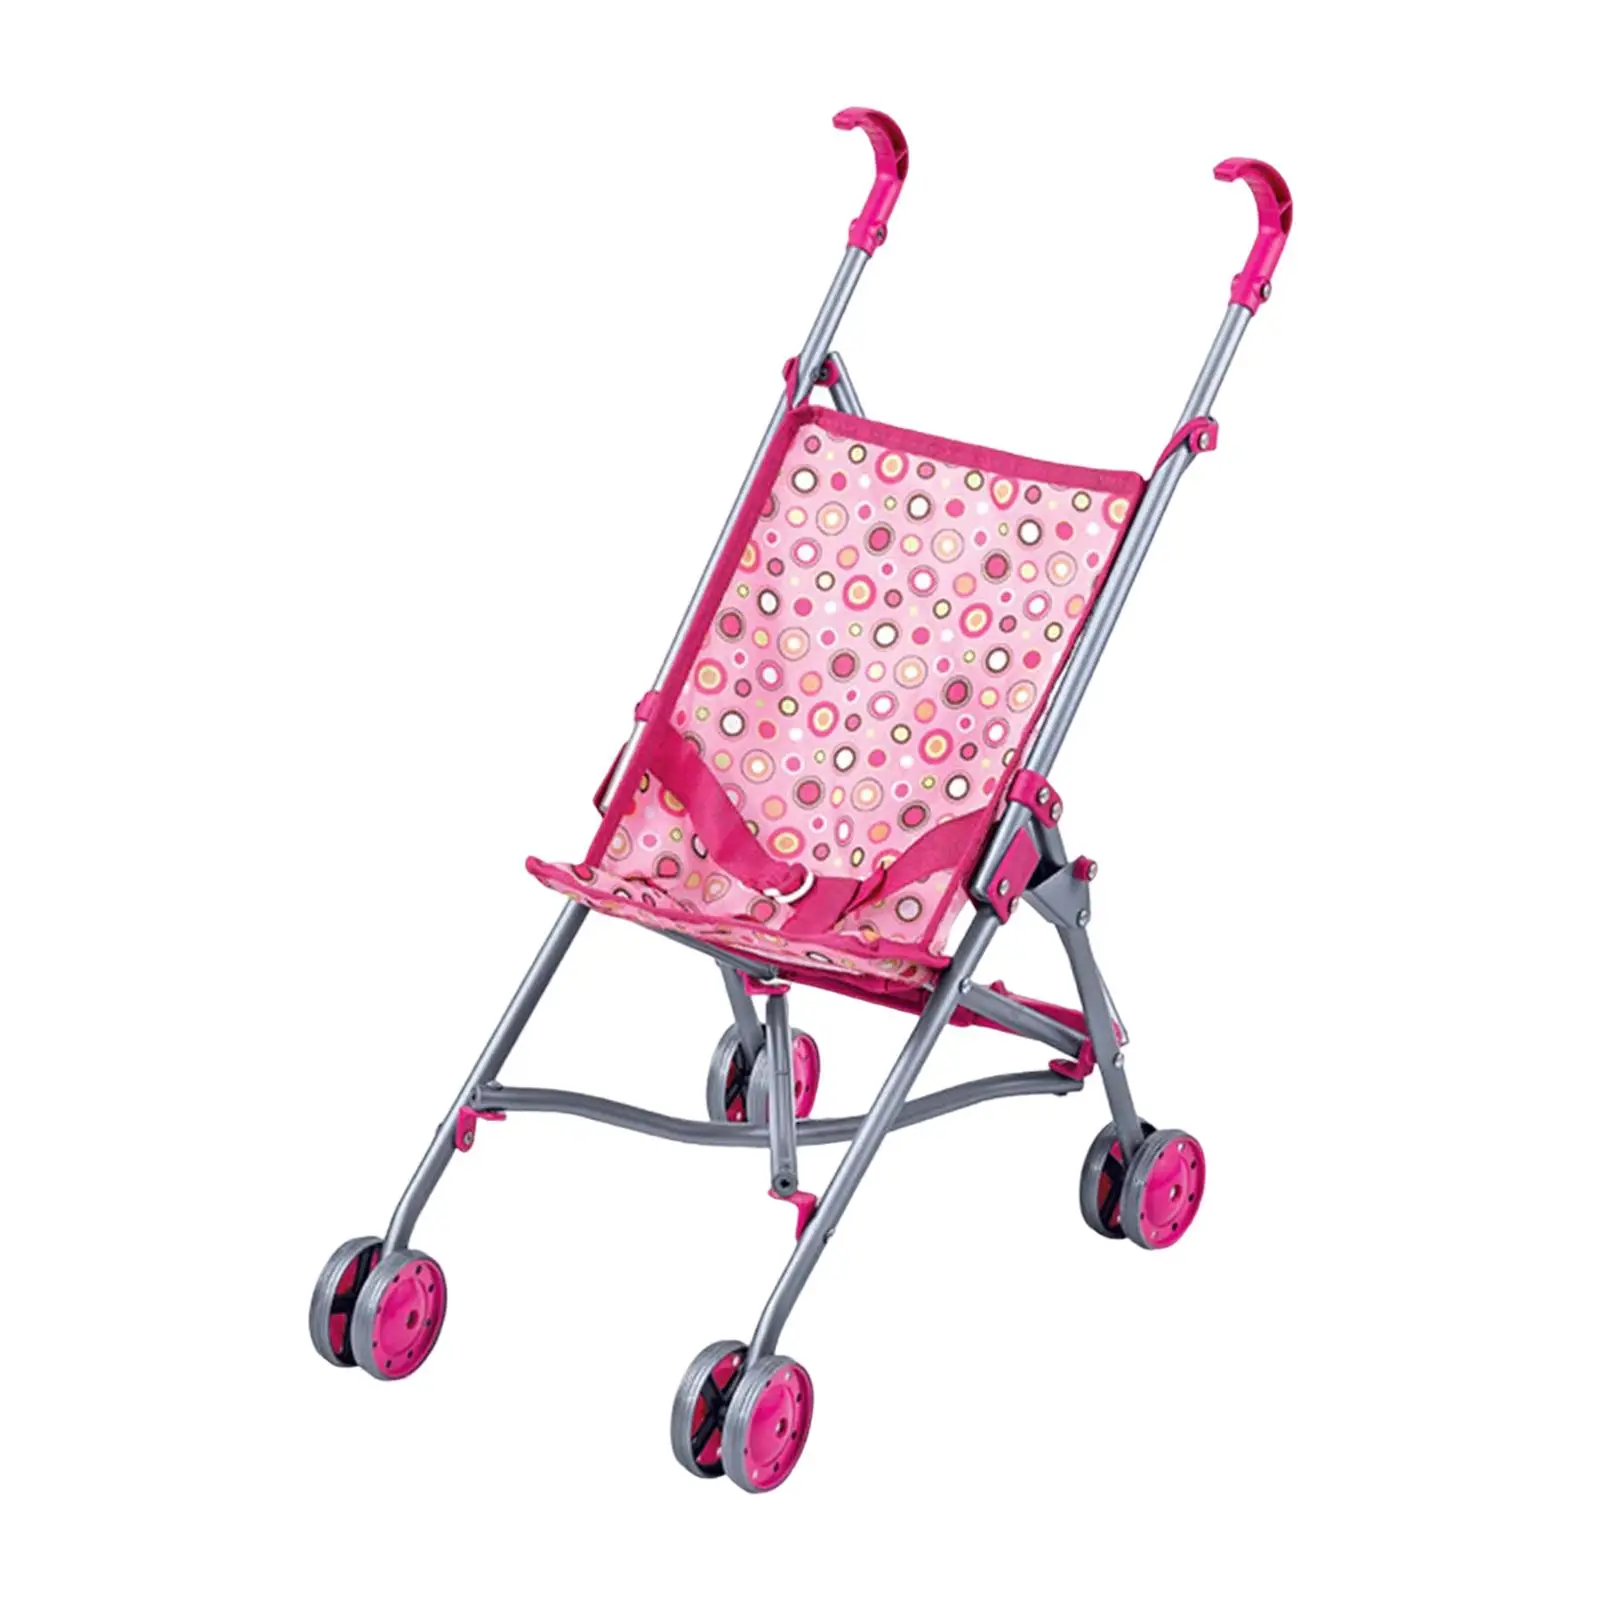 Simulation Baby Carriage Dotted Lightweight stroller Trolley for Birthday 40cm Dolls Toys Accessories Pretend Play